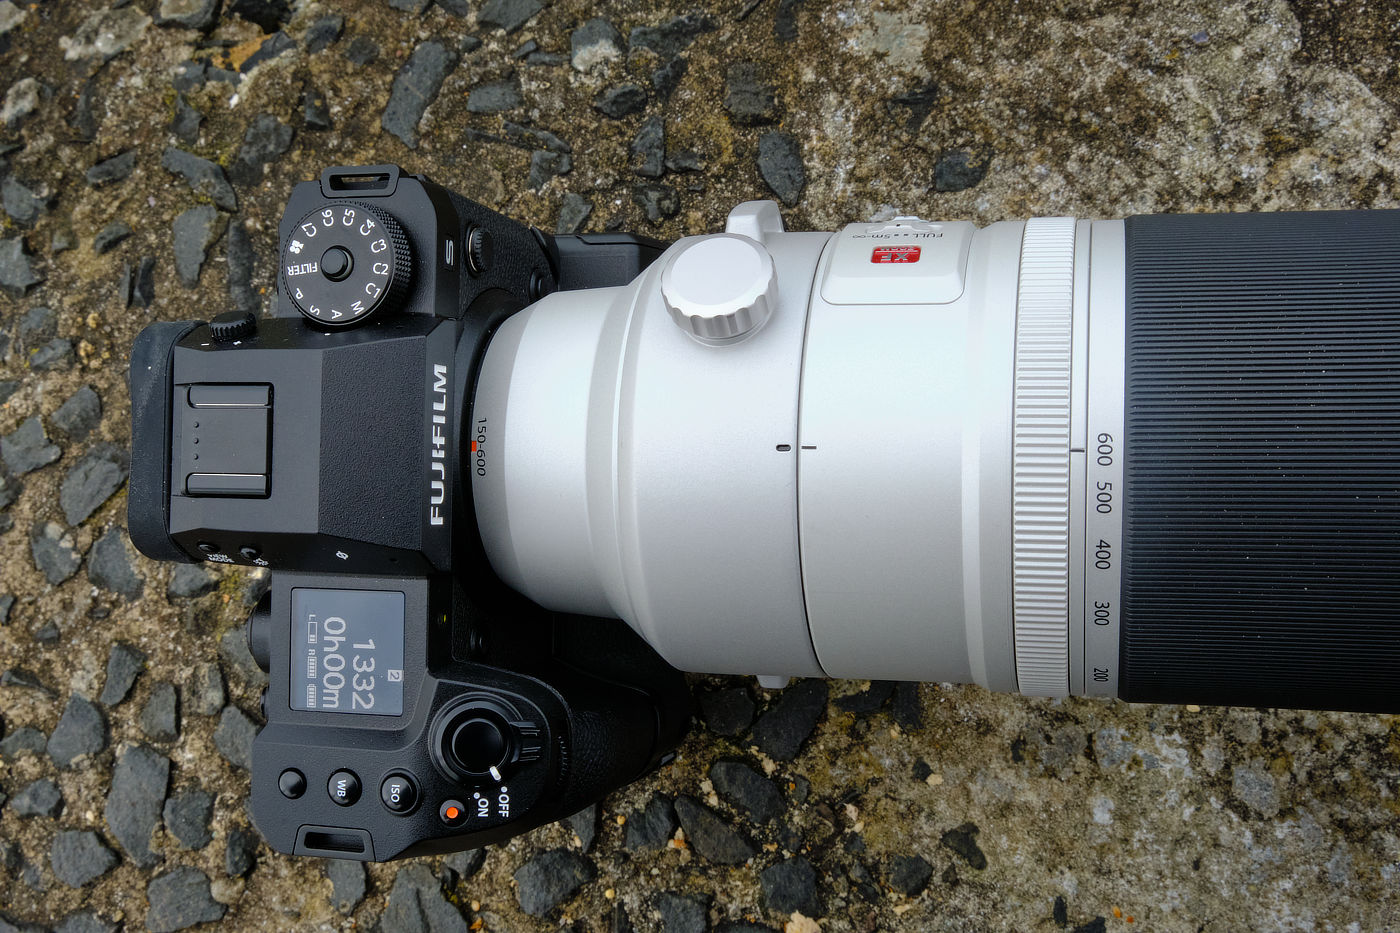 Fujifilm X-H2s and XF150-600mm lens